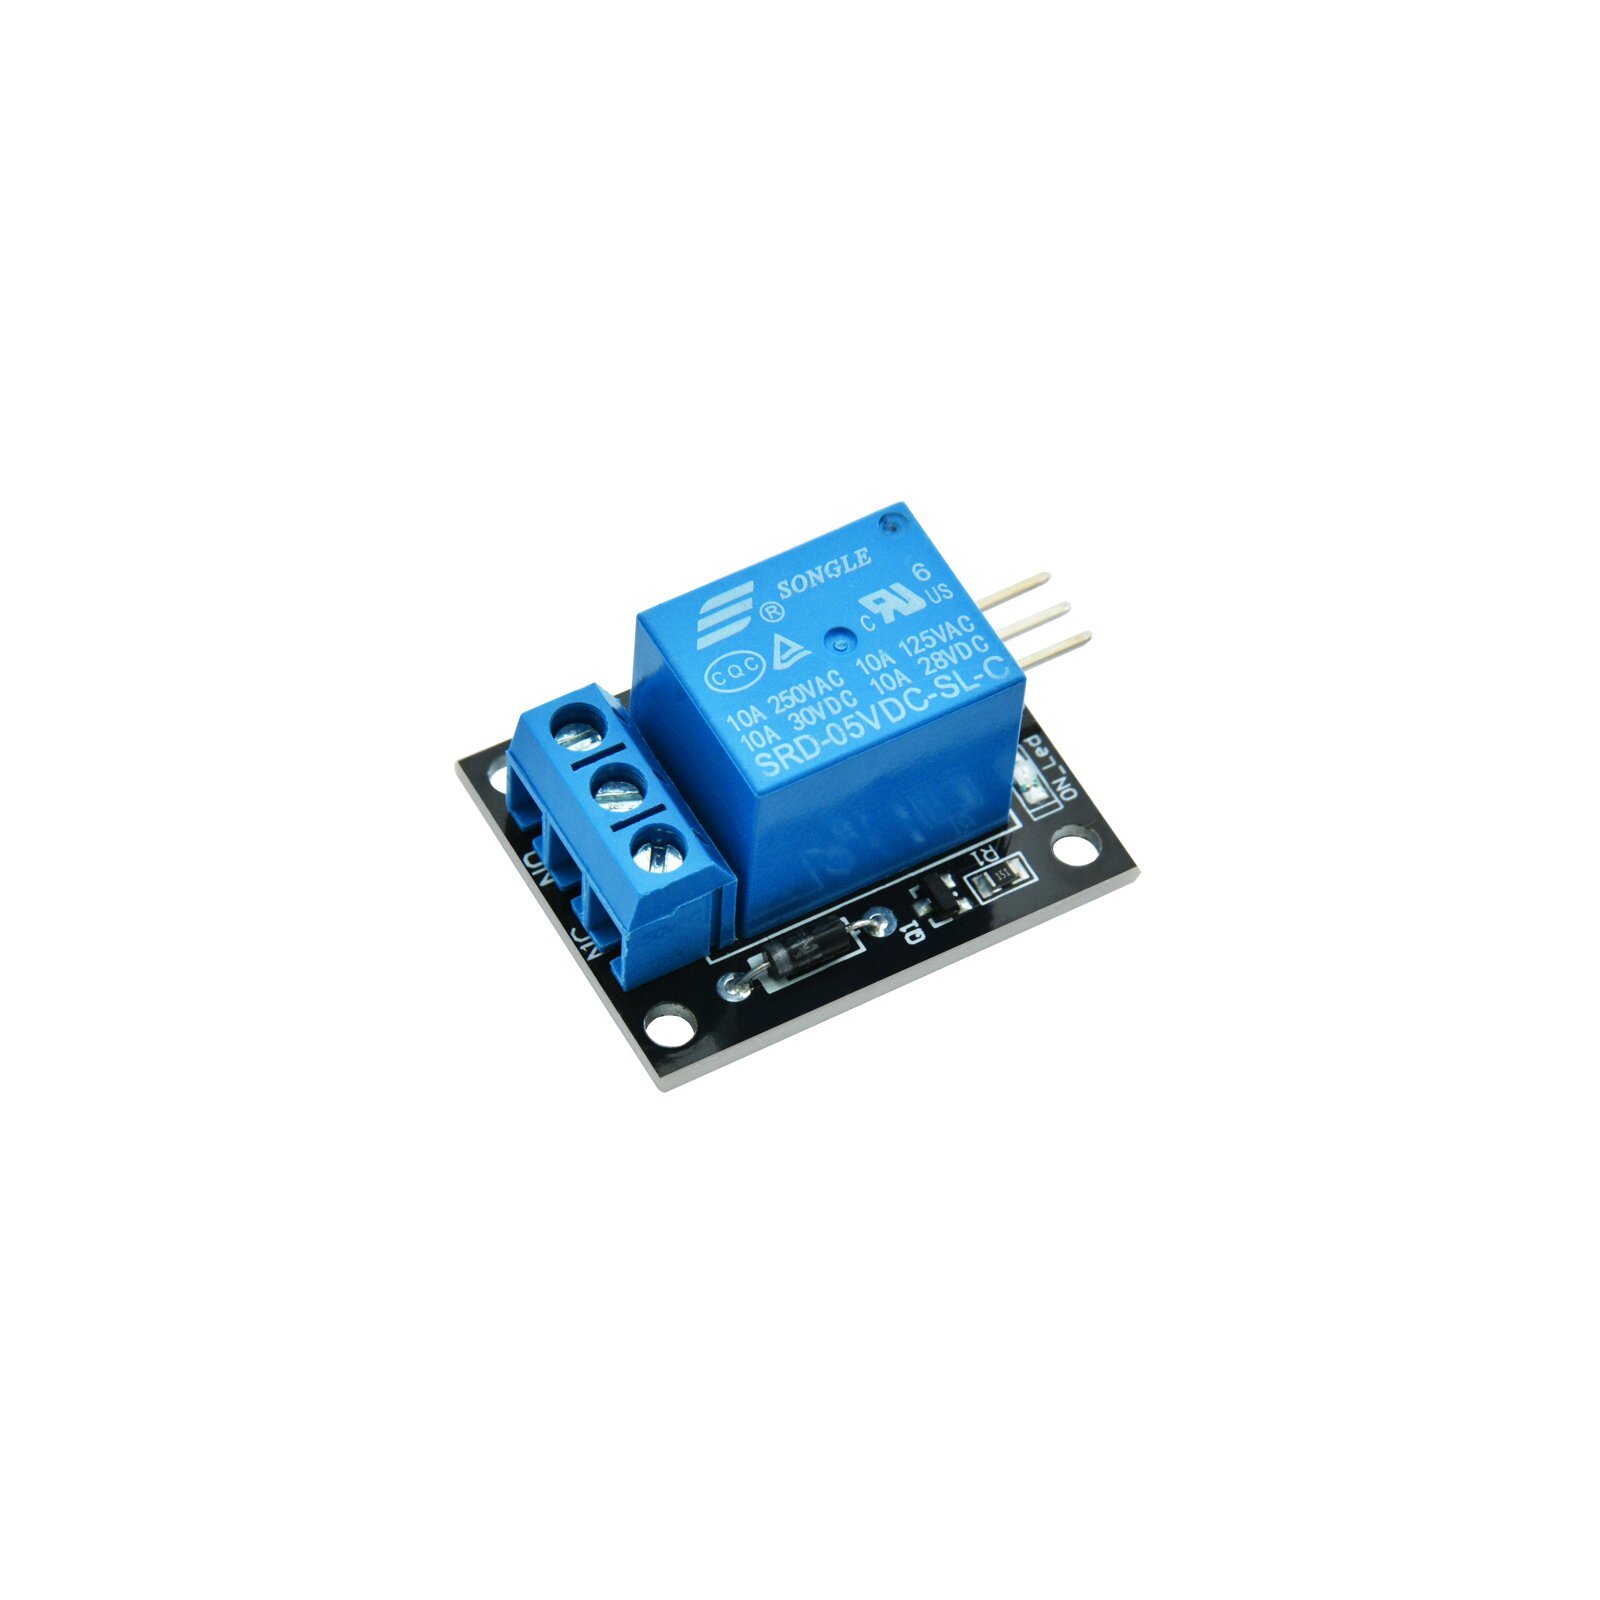 5V 1/2/4/8 Channel Relay Board Module Optocoupler LED for Arduino PiC ARM_sh.v 